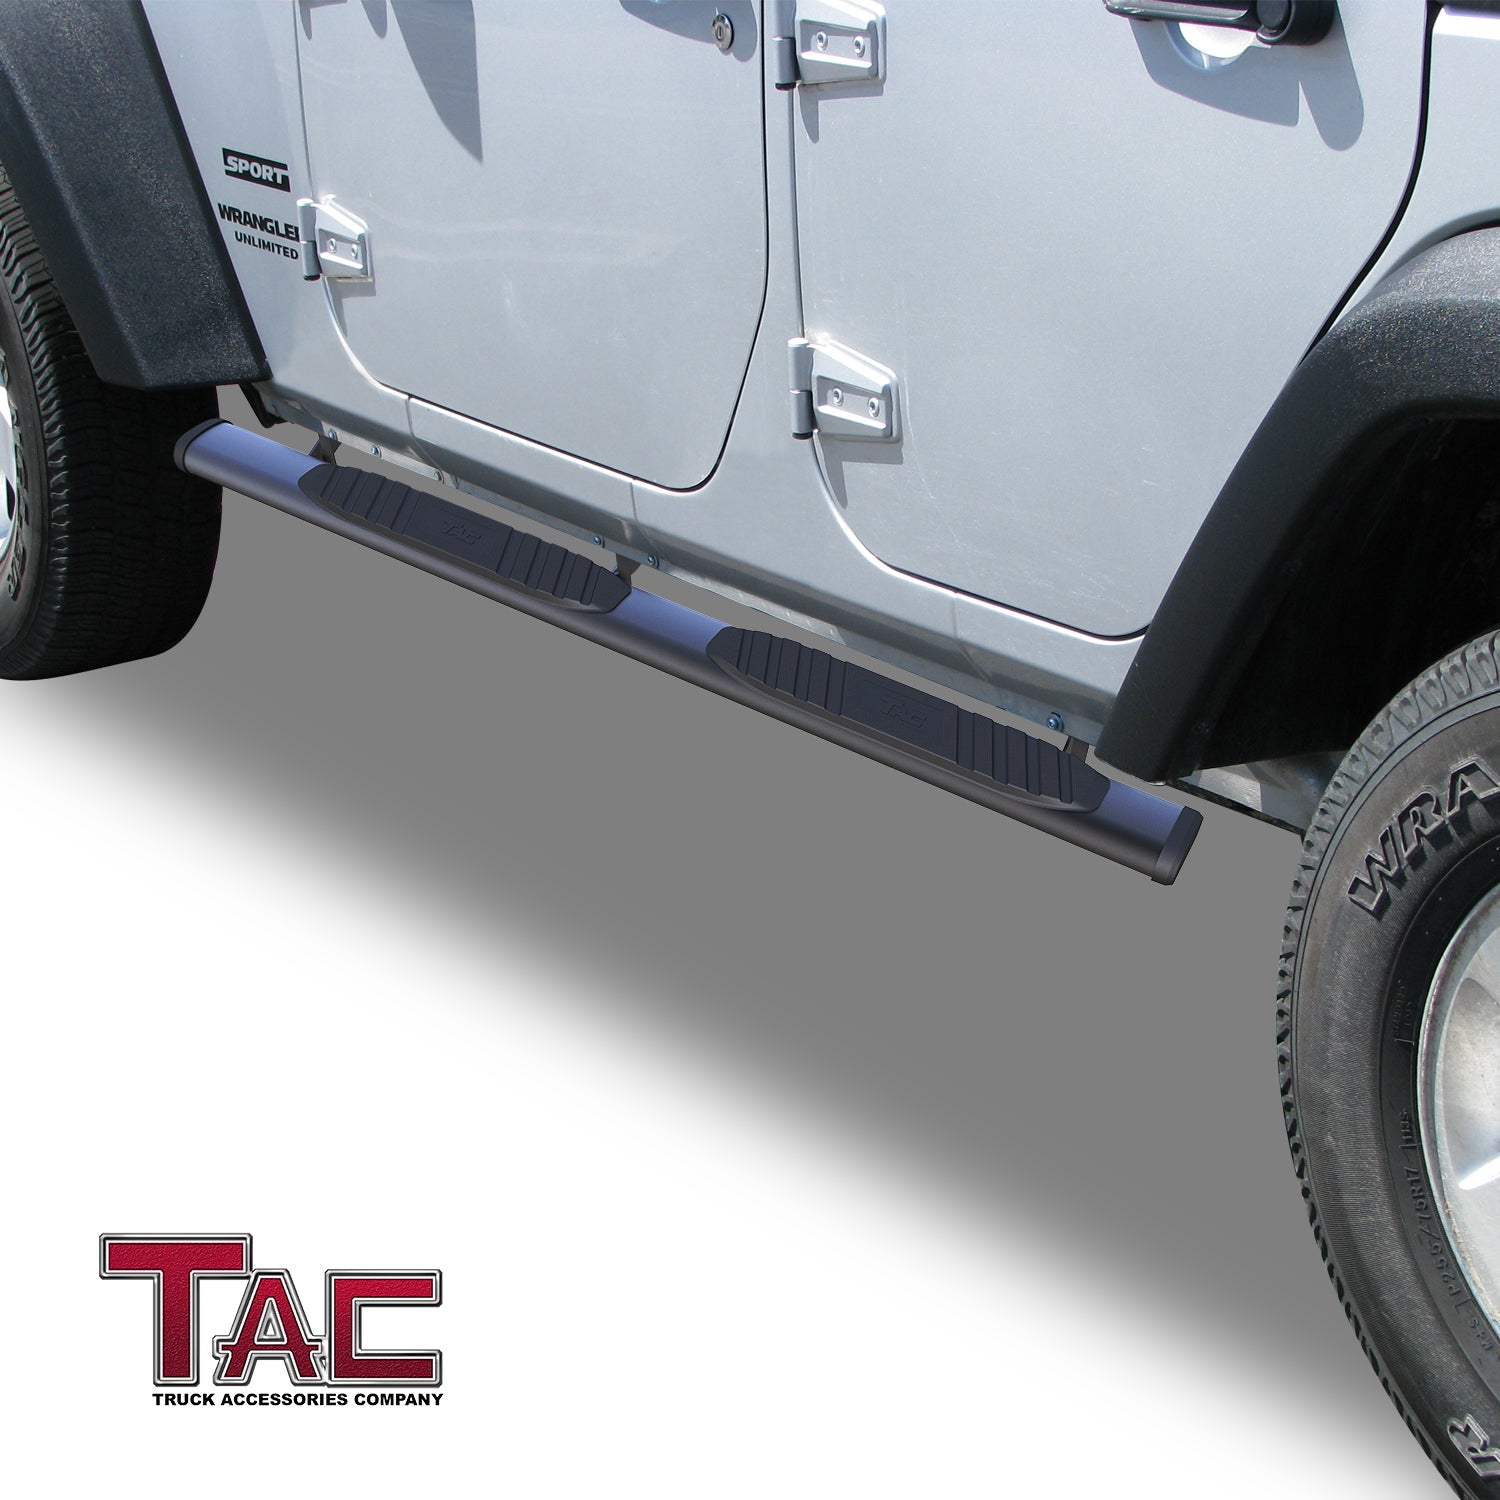 TAC Arrow Side Steps Running Boards Compatible with 2007-2018 Jeep Wrangler JK 4 Door SUV 5" Aluminum Texture Black Step Rails Nerf Bars Lightweight Off Road Accessories 2Pcs - 0